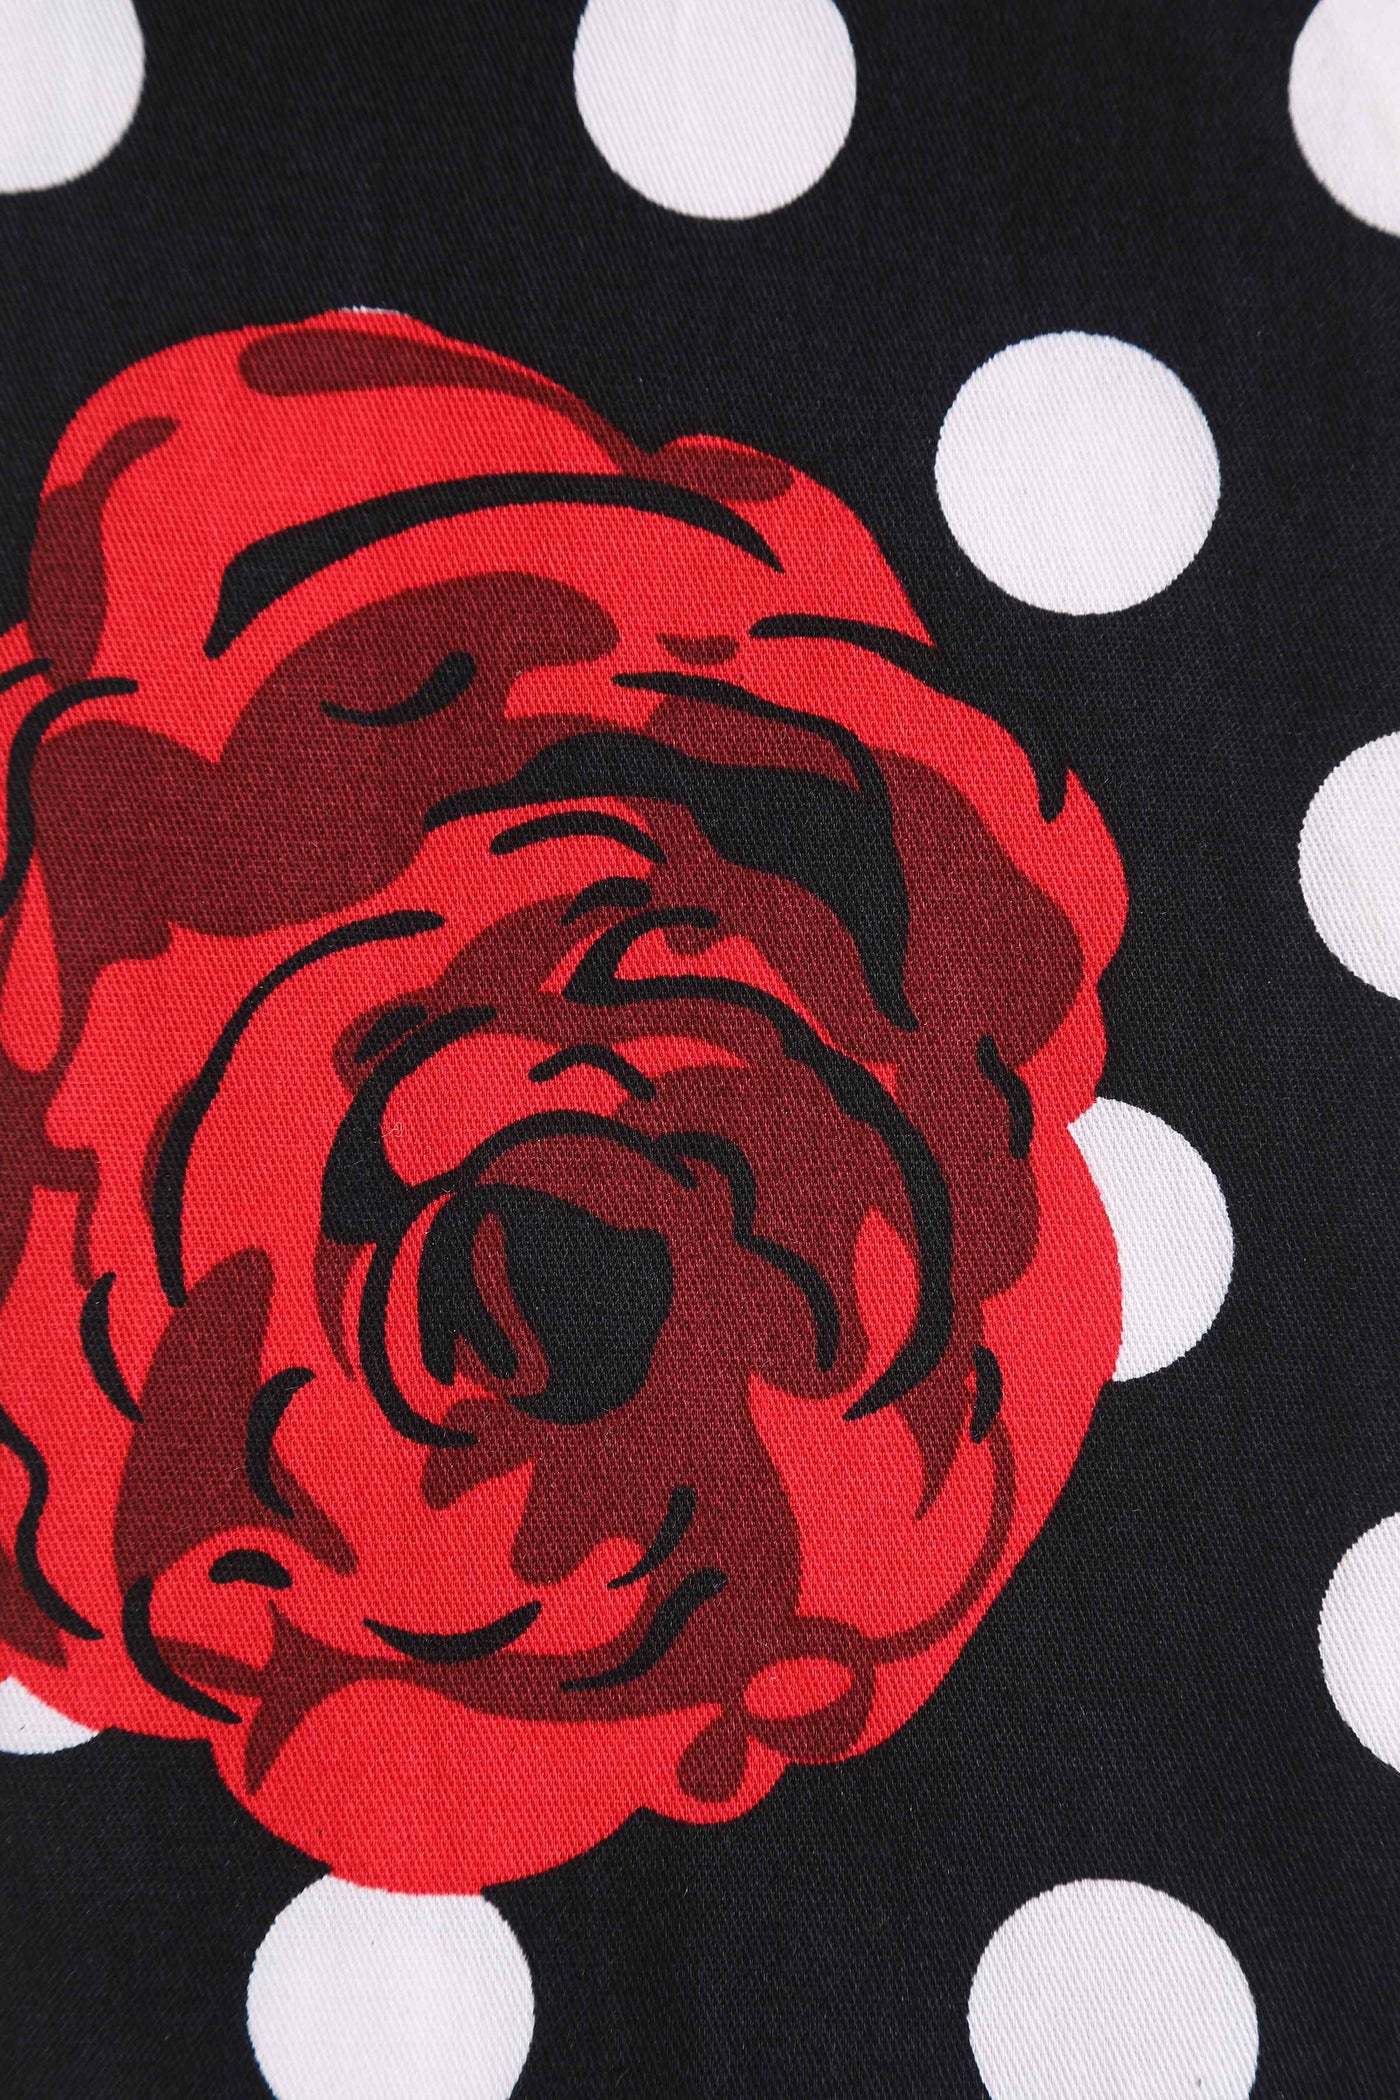 Close up on print; red roses and black and white polka dot spots